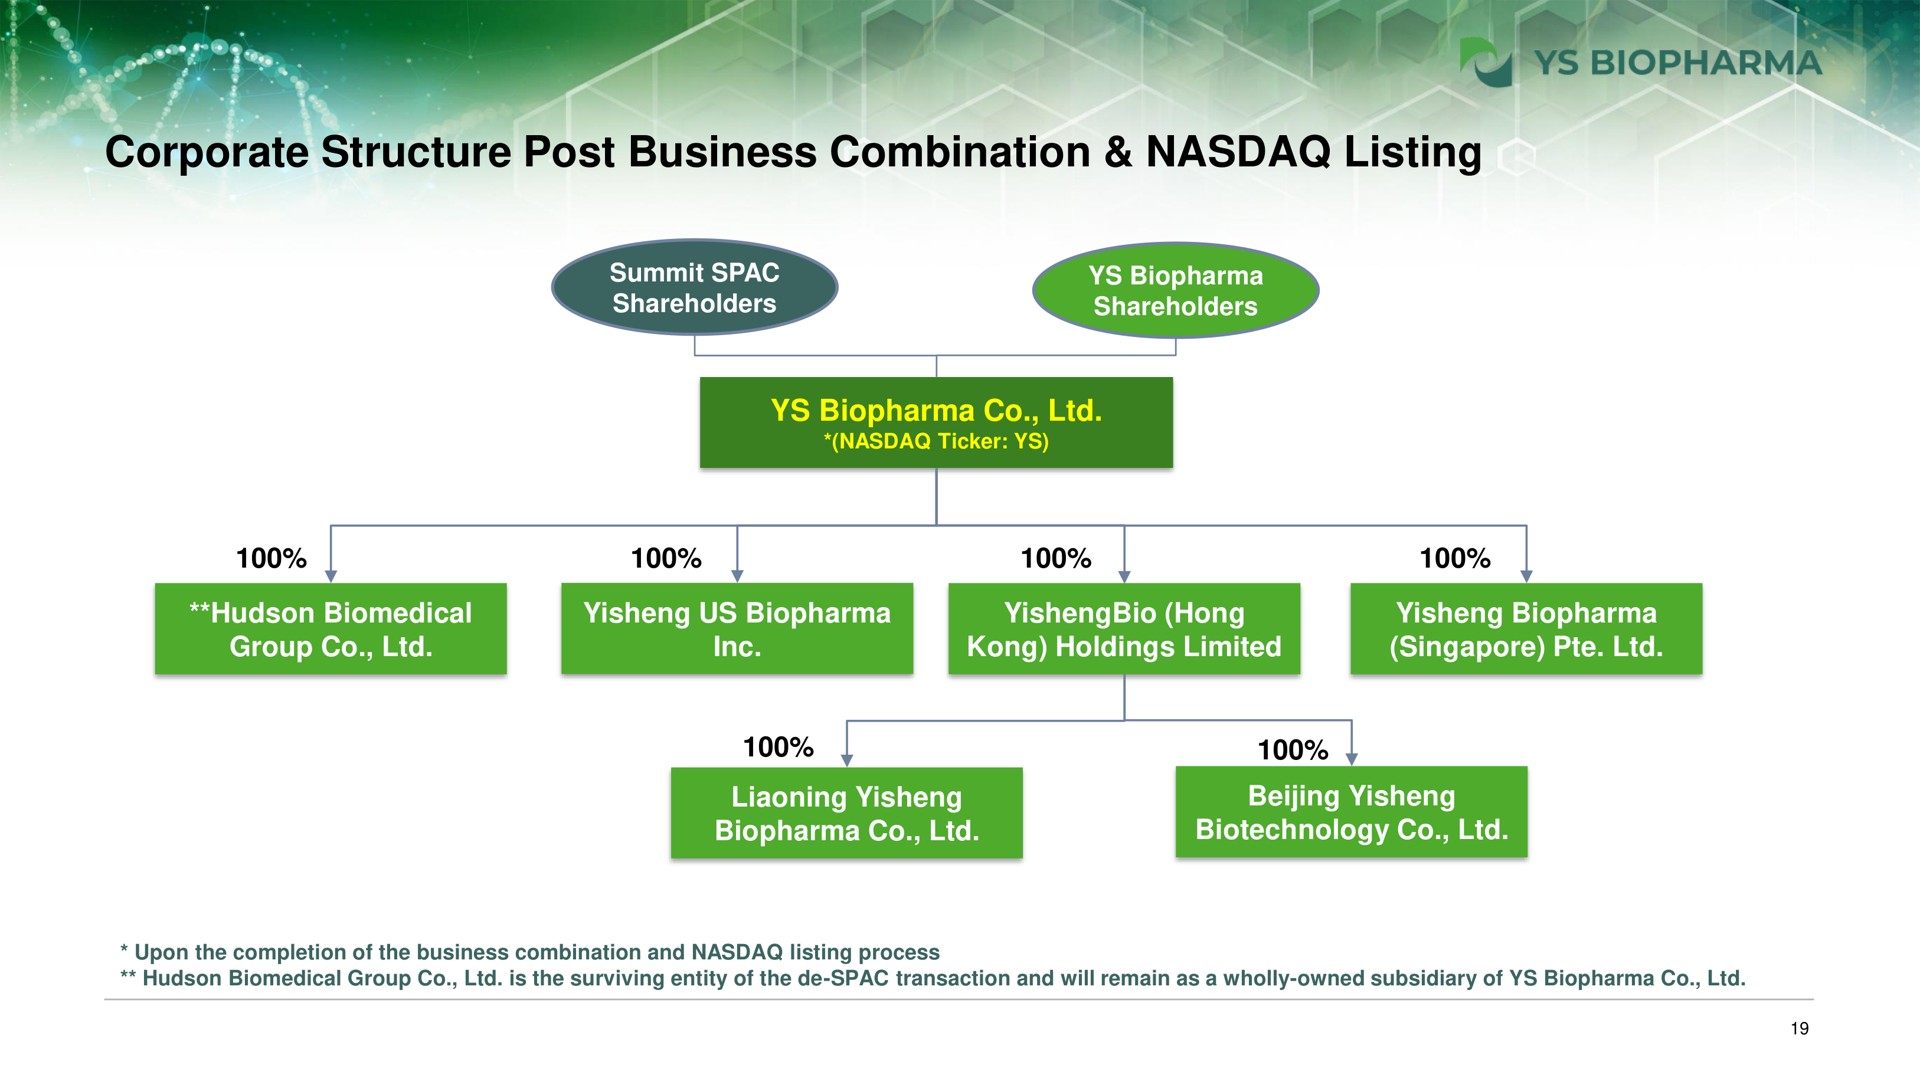 corporate structure post business combination listing | YS Biopharma